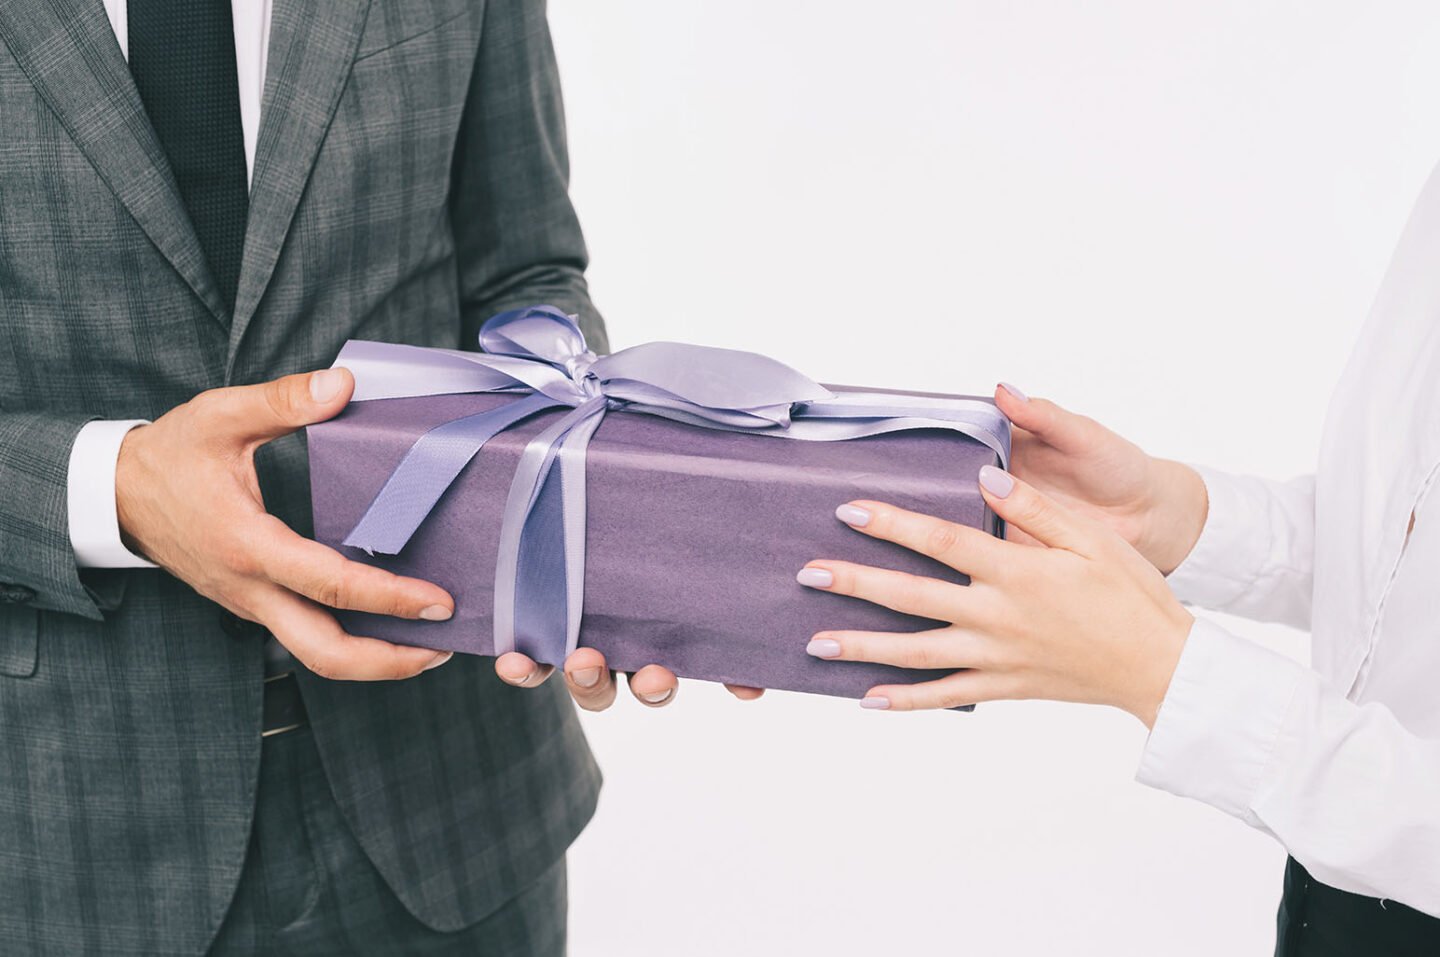 7 Corporate Gift Ideas to WOW - AnnMarie John